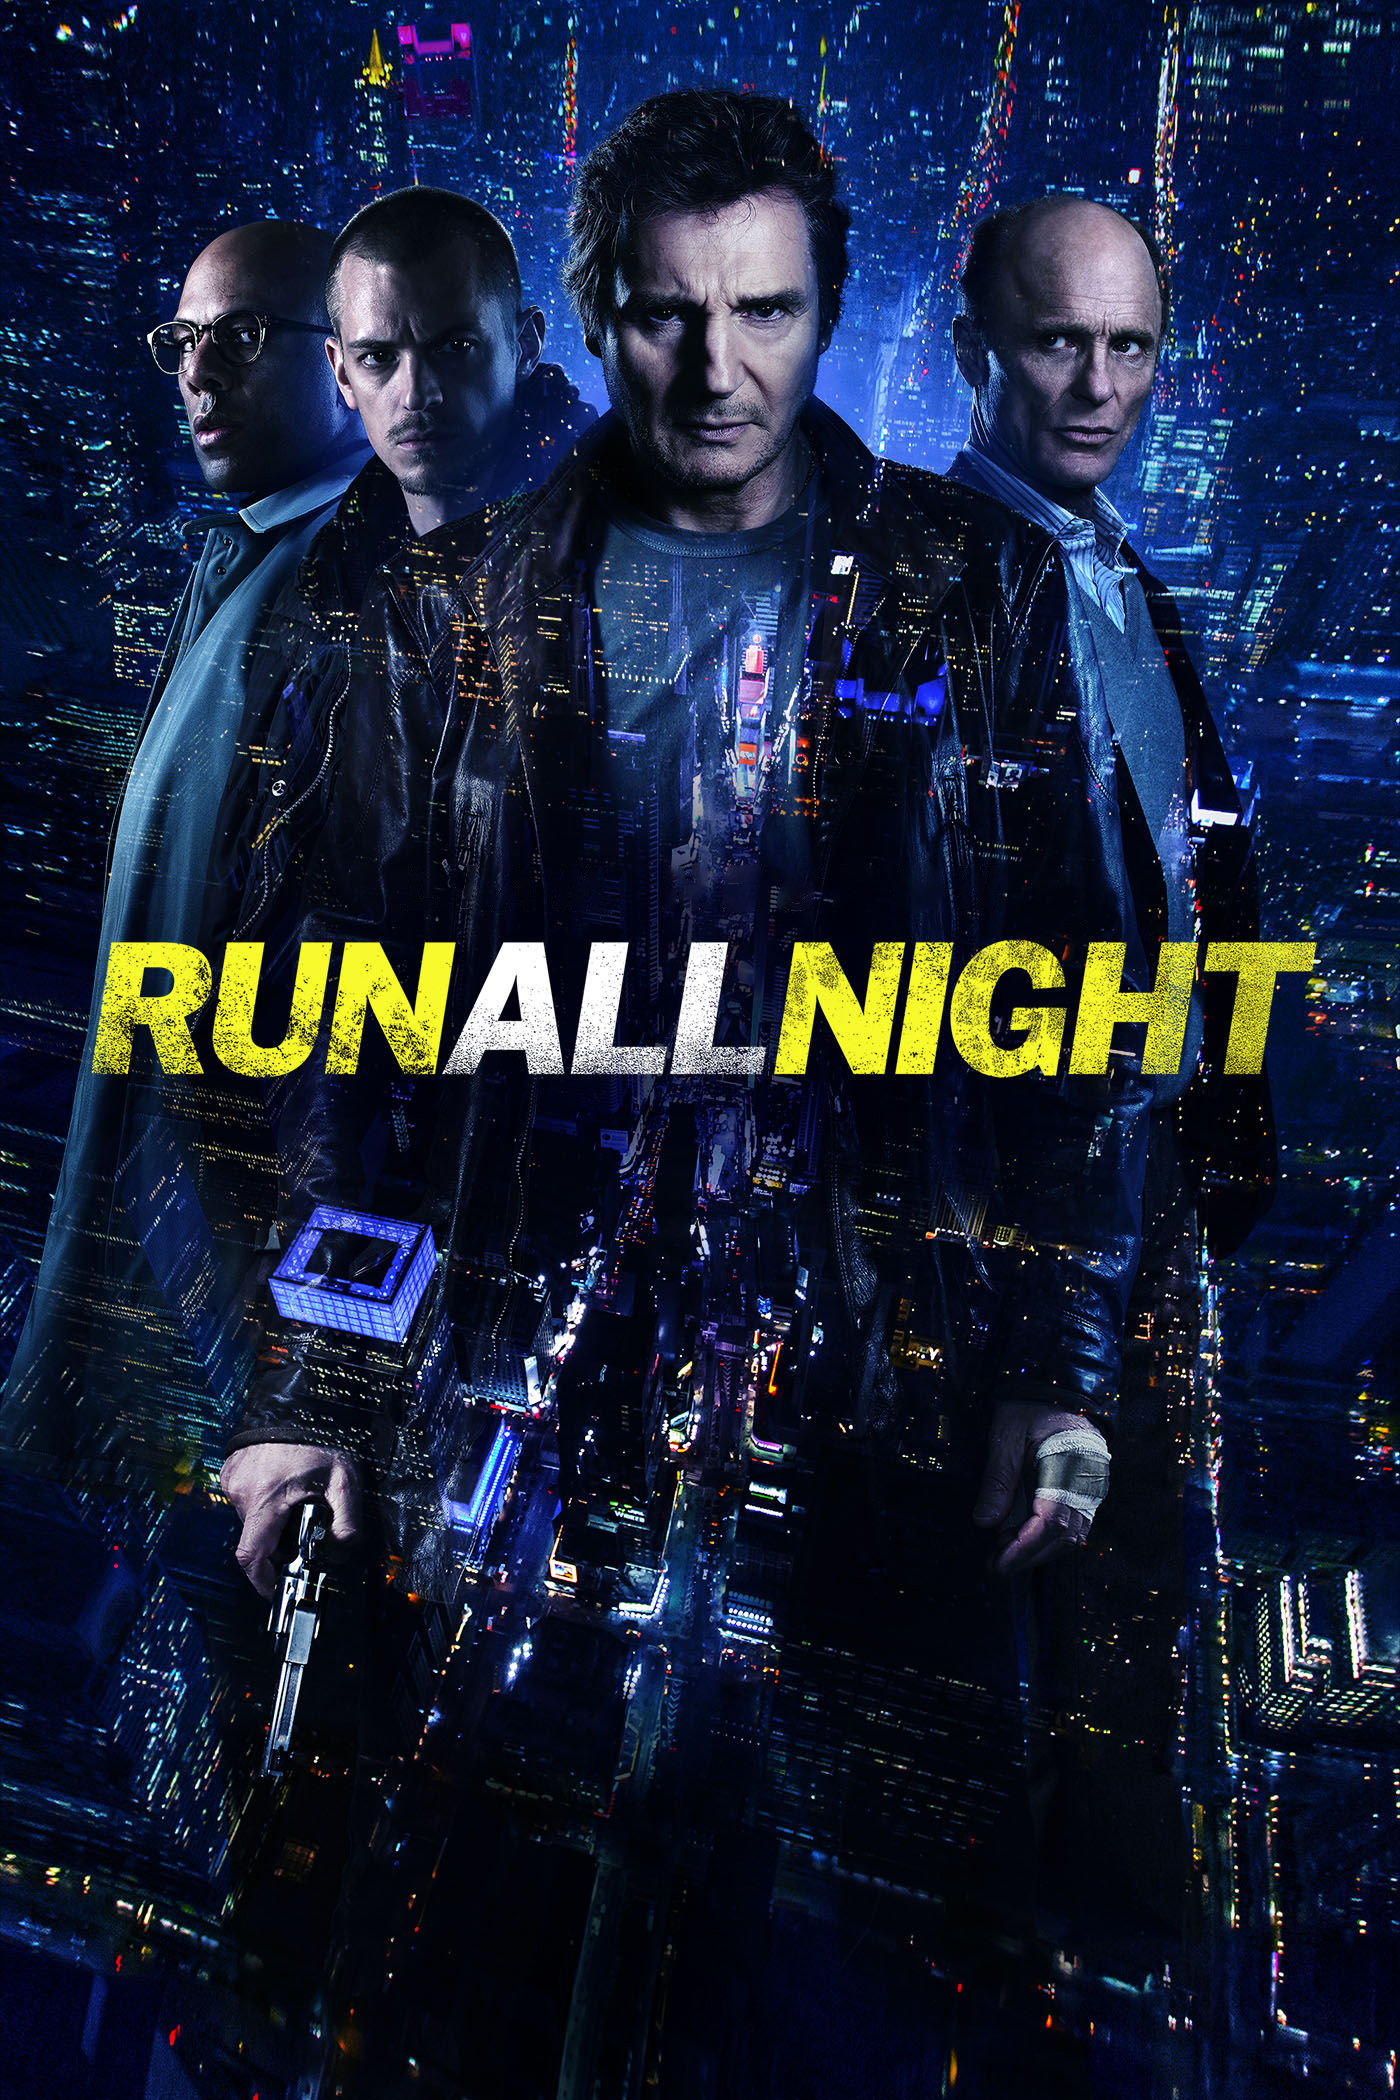 Poster for the movie "Run All Night"